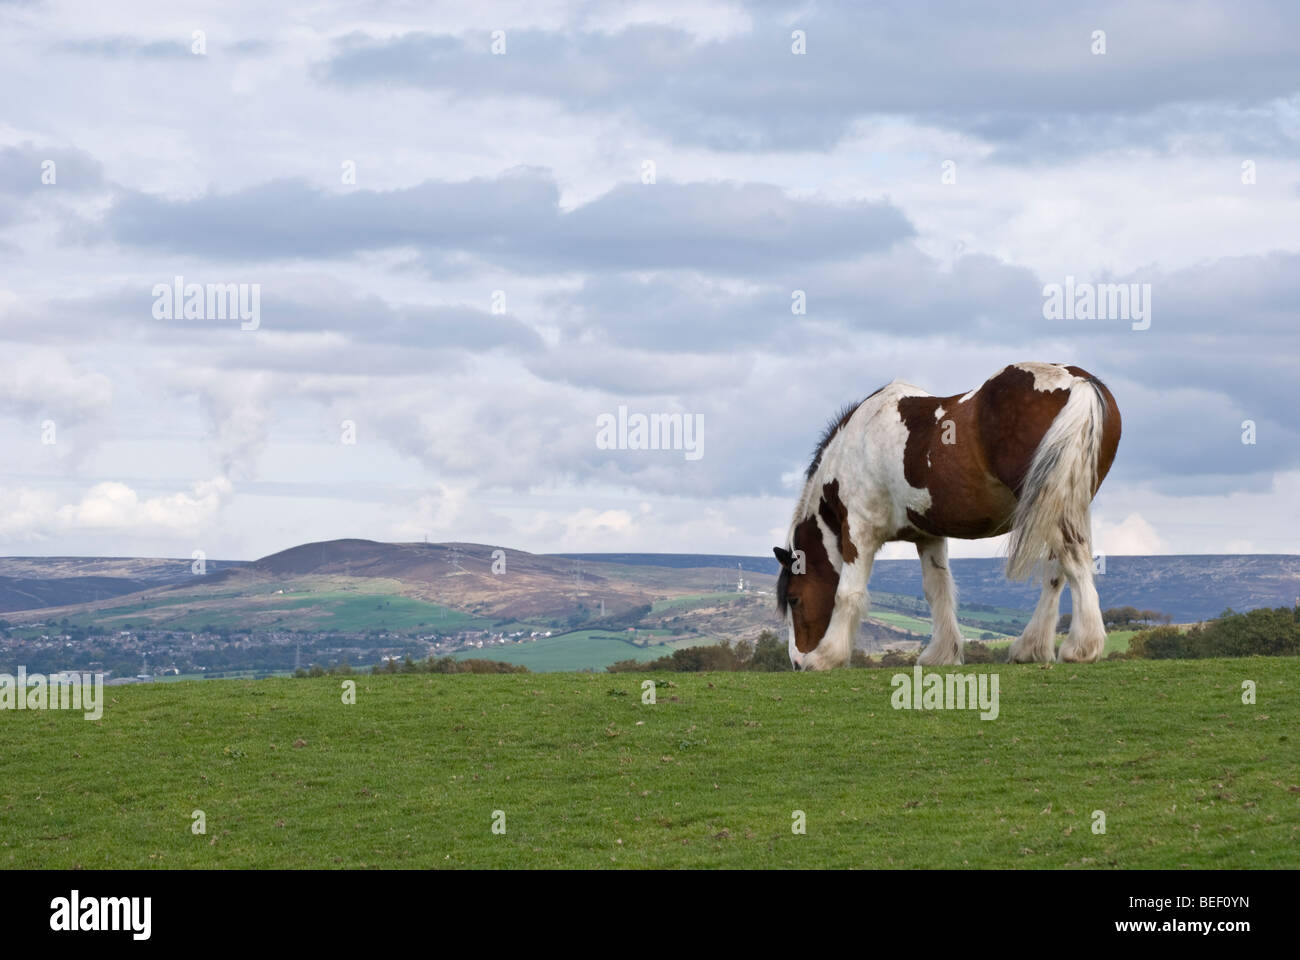 skewbald brown and white horse grazing in a meadow Stock Photo